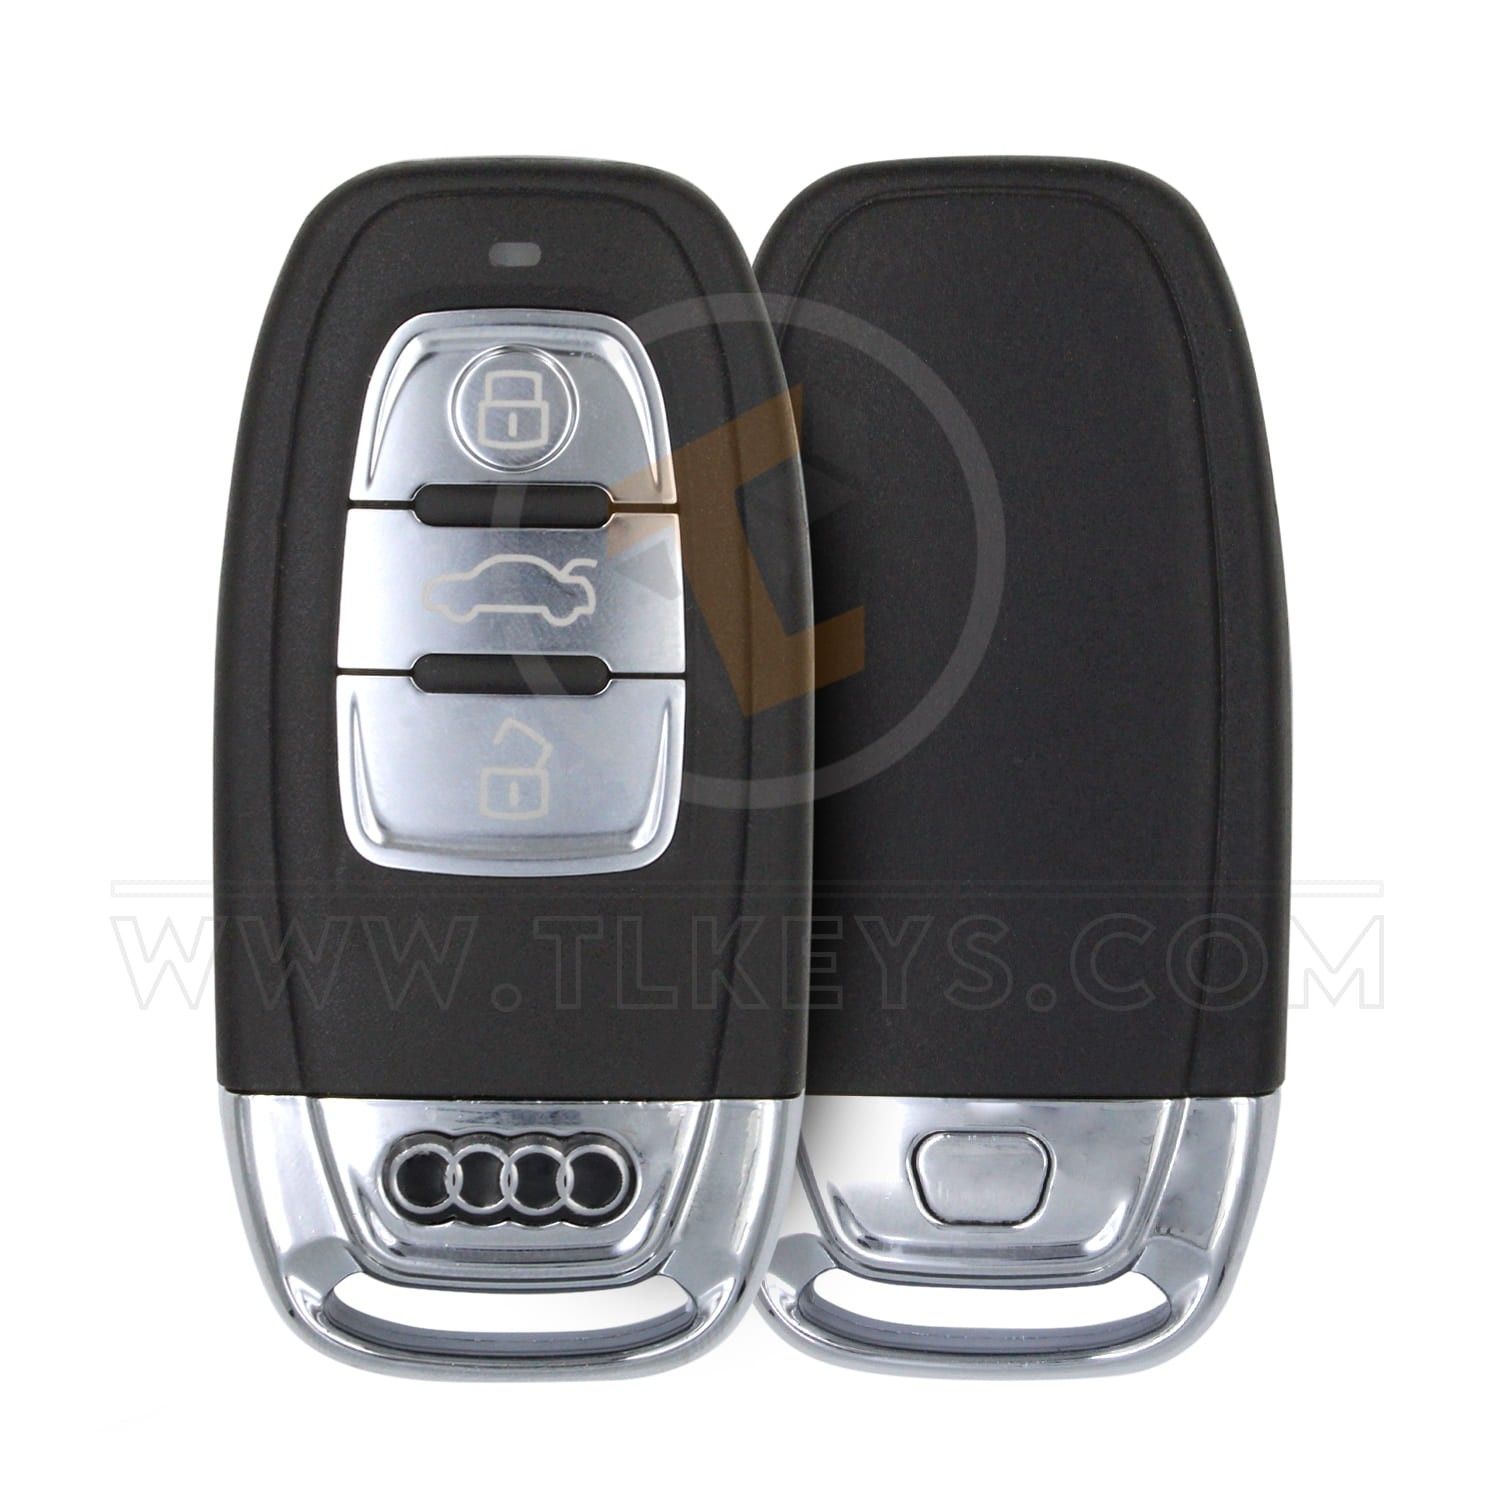 Original Audi Smart Proximity 434MHz 3 Buttons Frequency 434MHz